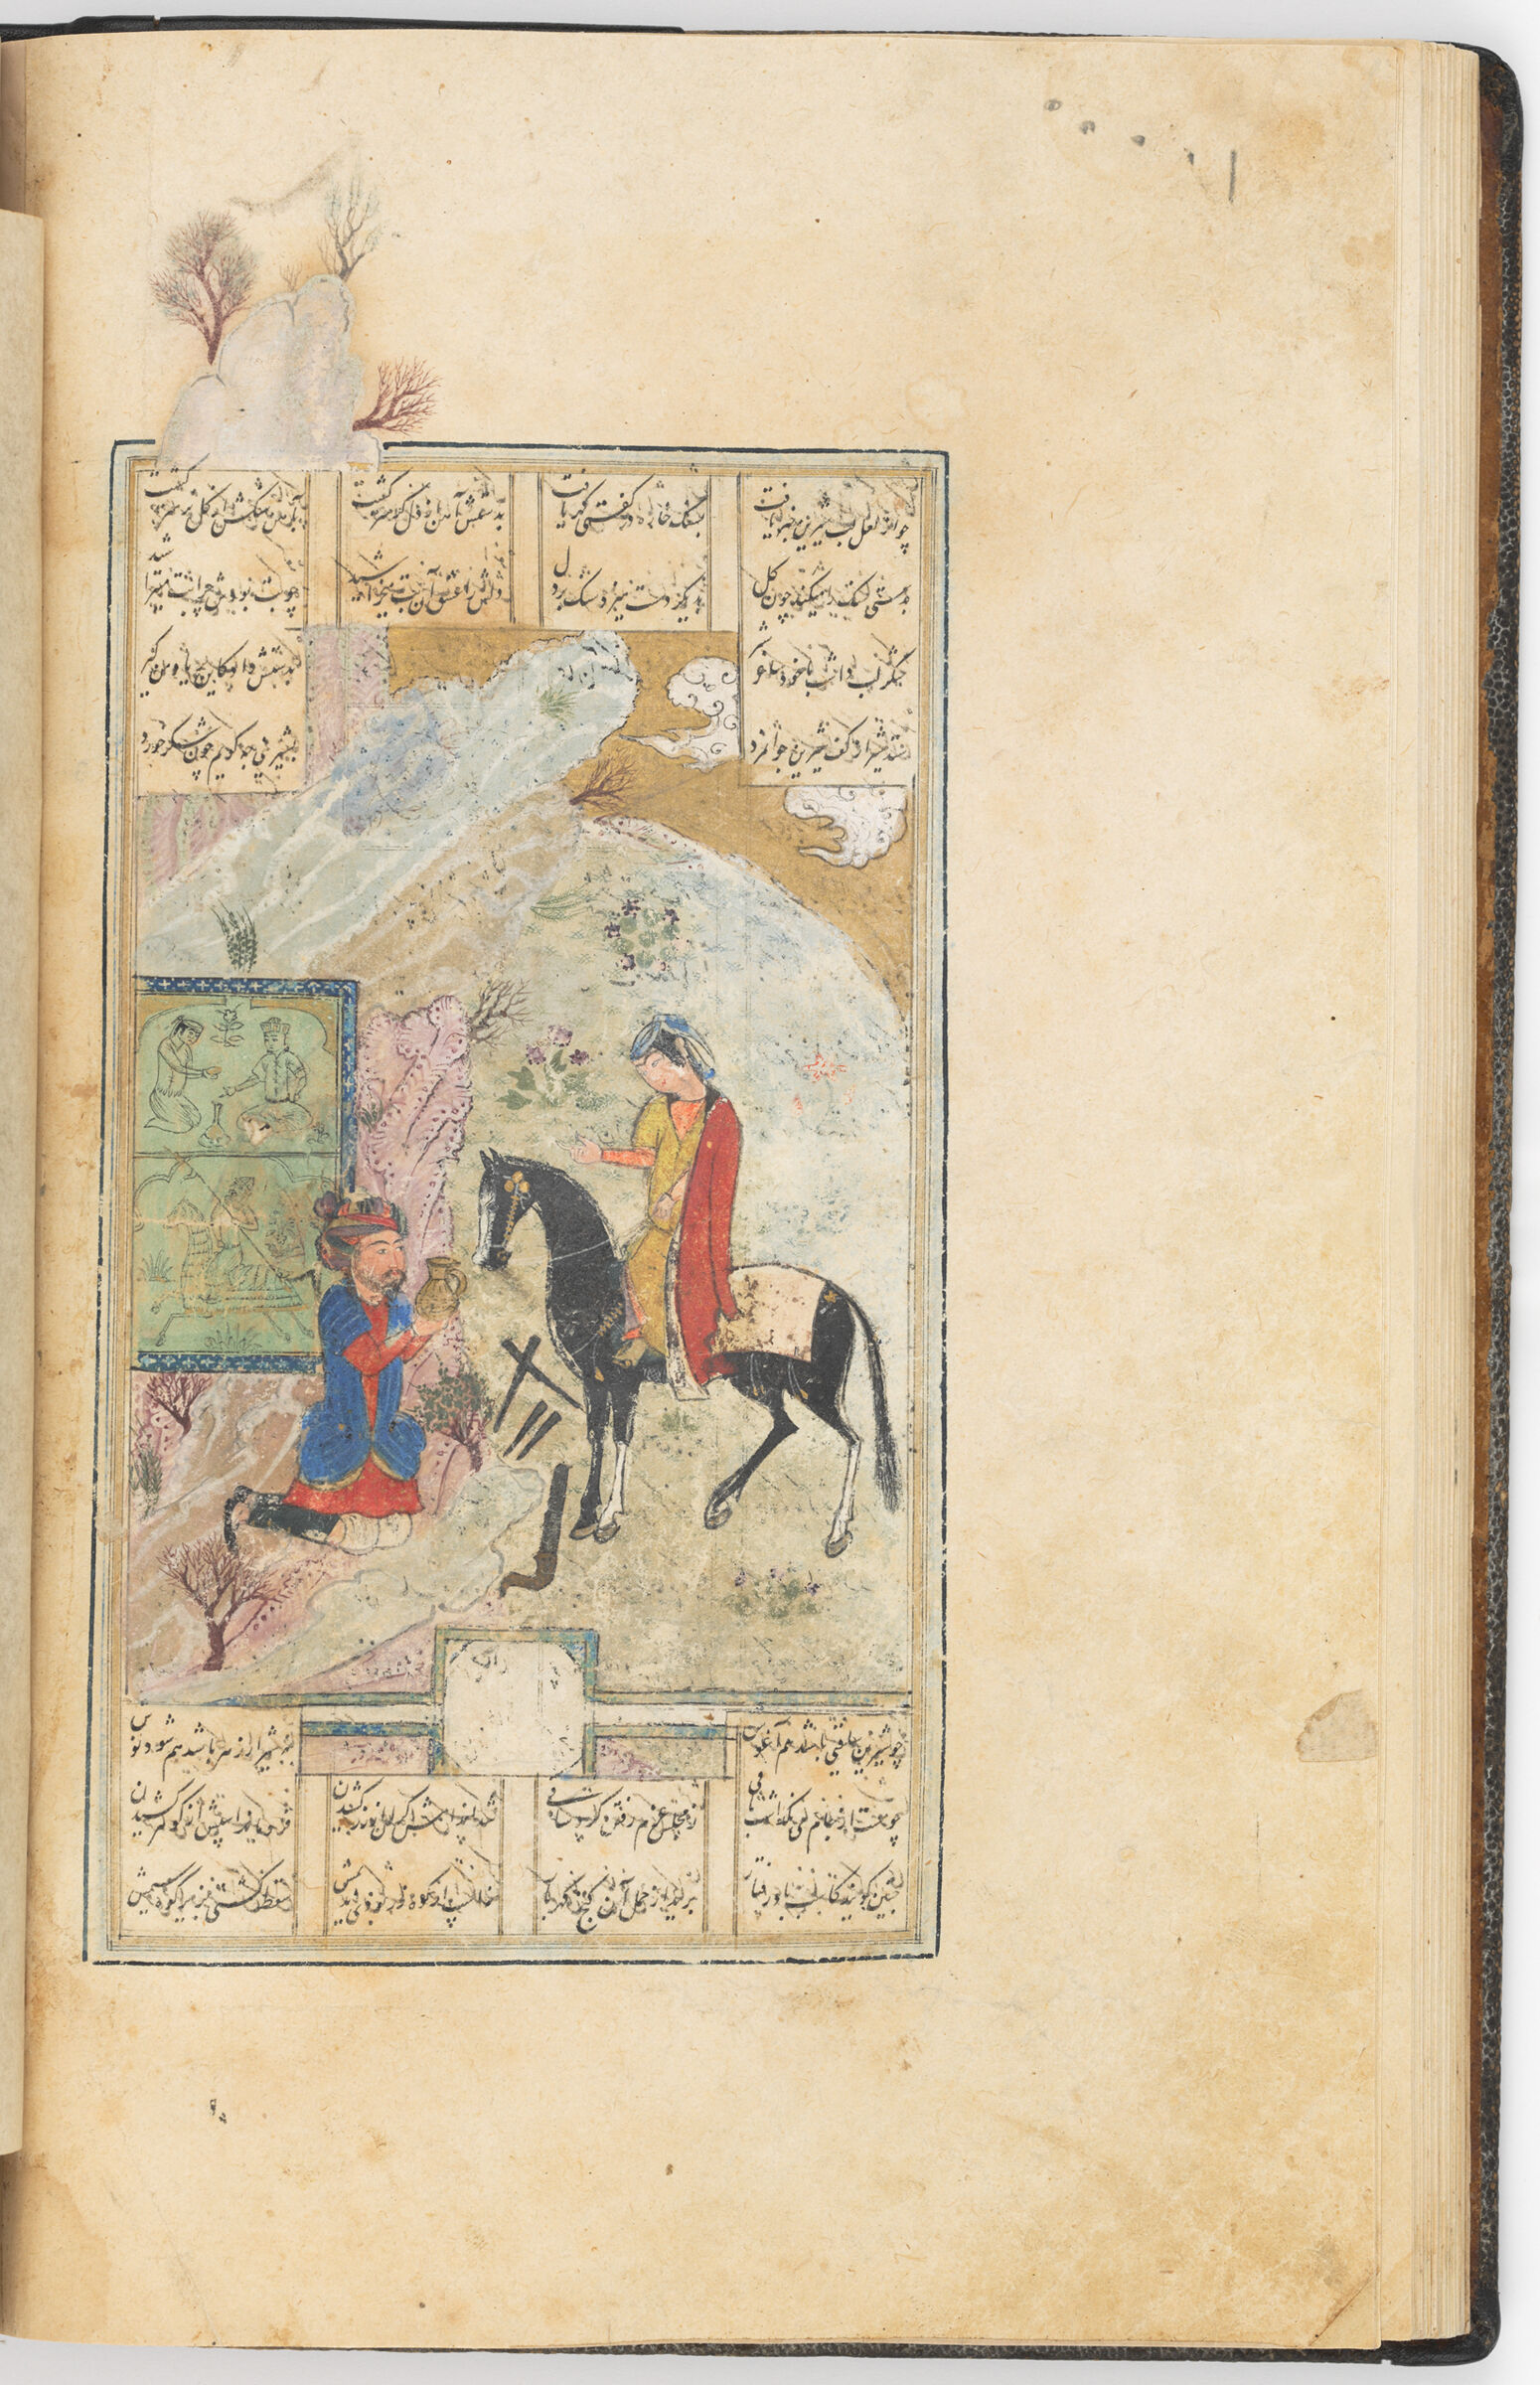 Shirin Goes To Mount Bistun And Meets Farhad (Text Recto; Painting Verso Of Folio 77), Painting From A Manuscript Of The Khamsa By Nizam